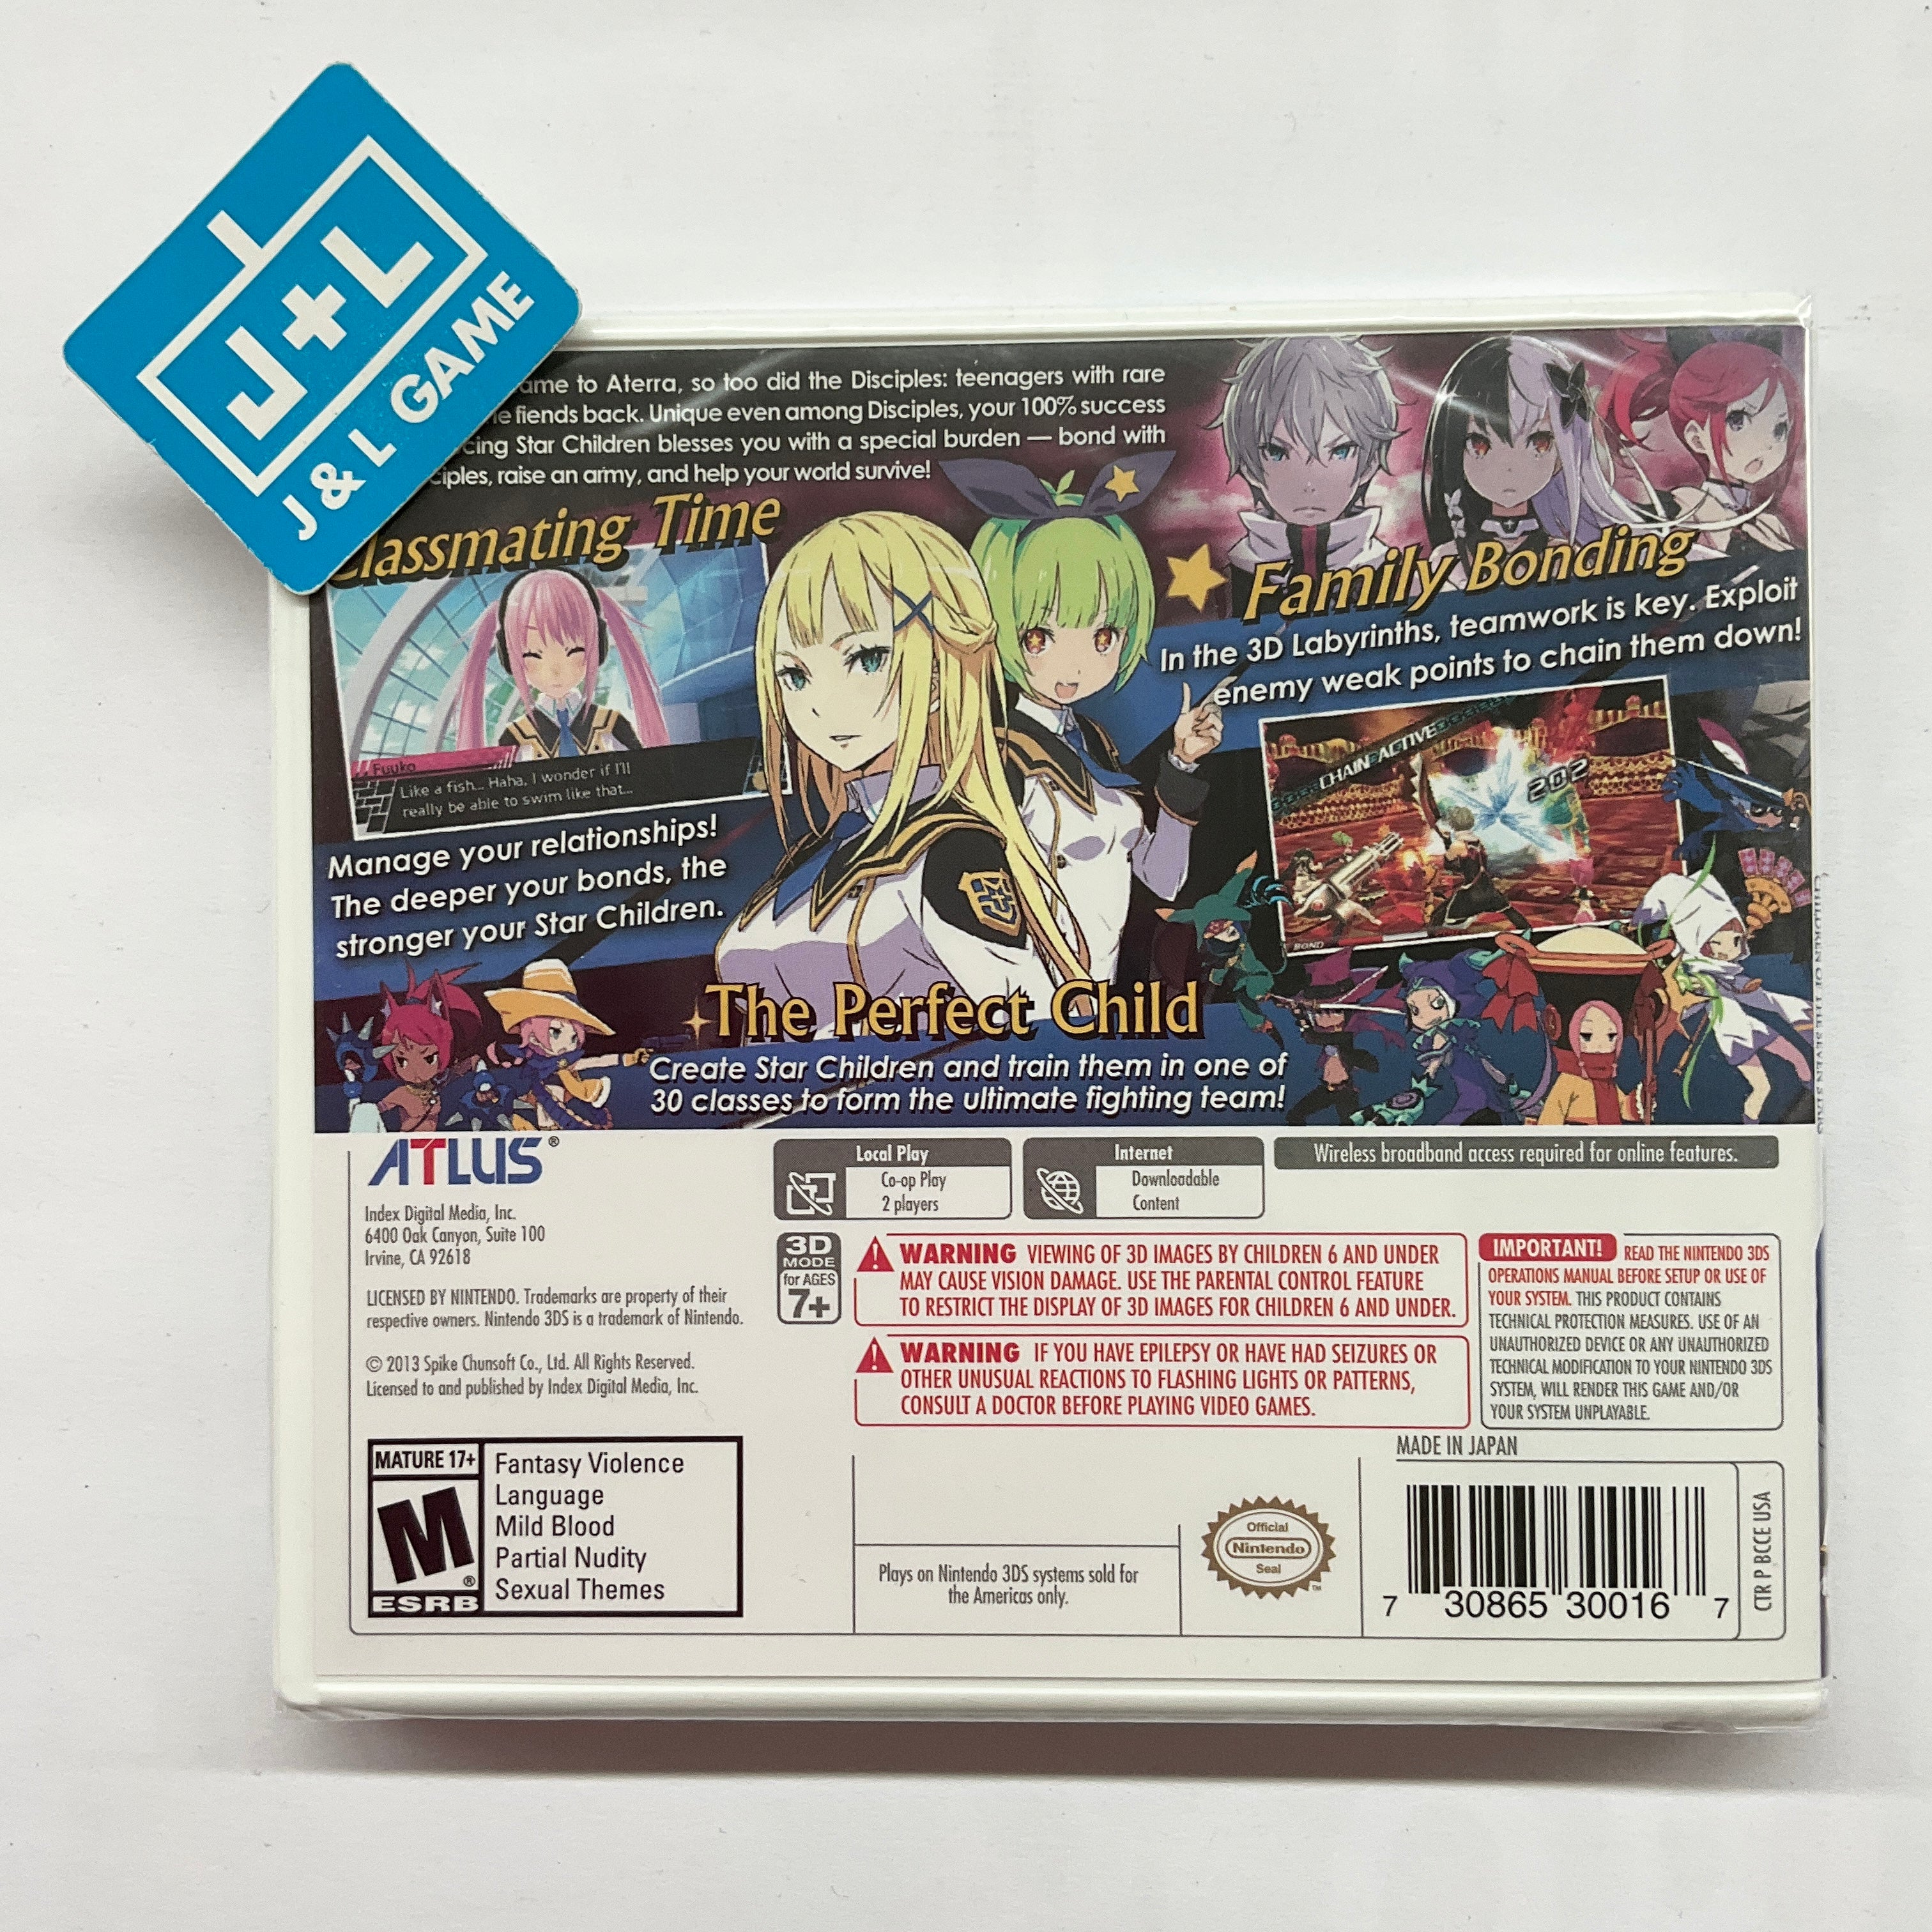 Conception II: Children of the Seven Stars - Nintendo 3DS Video Games Atlus   